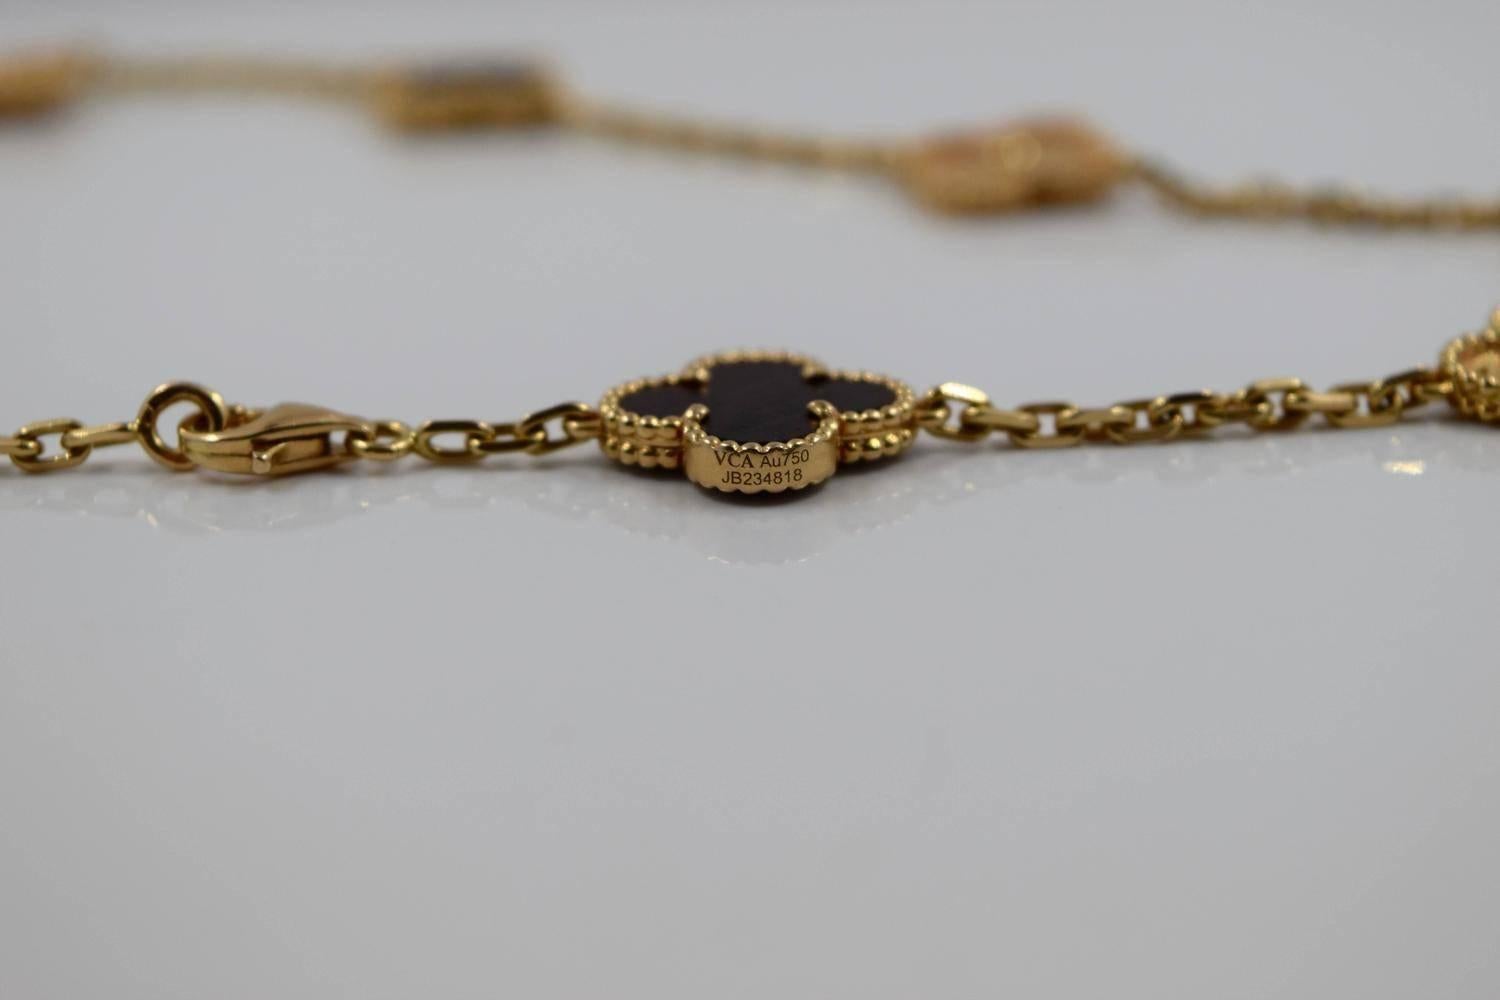 Van Cleef & Arpels Bois d'Amourette Gold 10 Motif Necklace

About the Item:
Extraordinarily RARE and collectable Alhambra piece, by Van Cleef & Arpels
18K Rose Gold and Bois d'Amourette (letterwood). Vintage and aged to perfection this series is